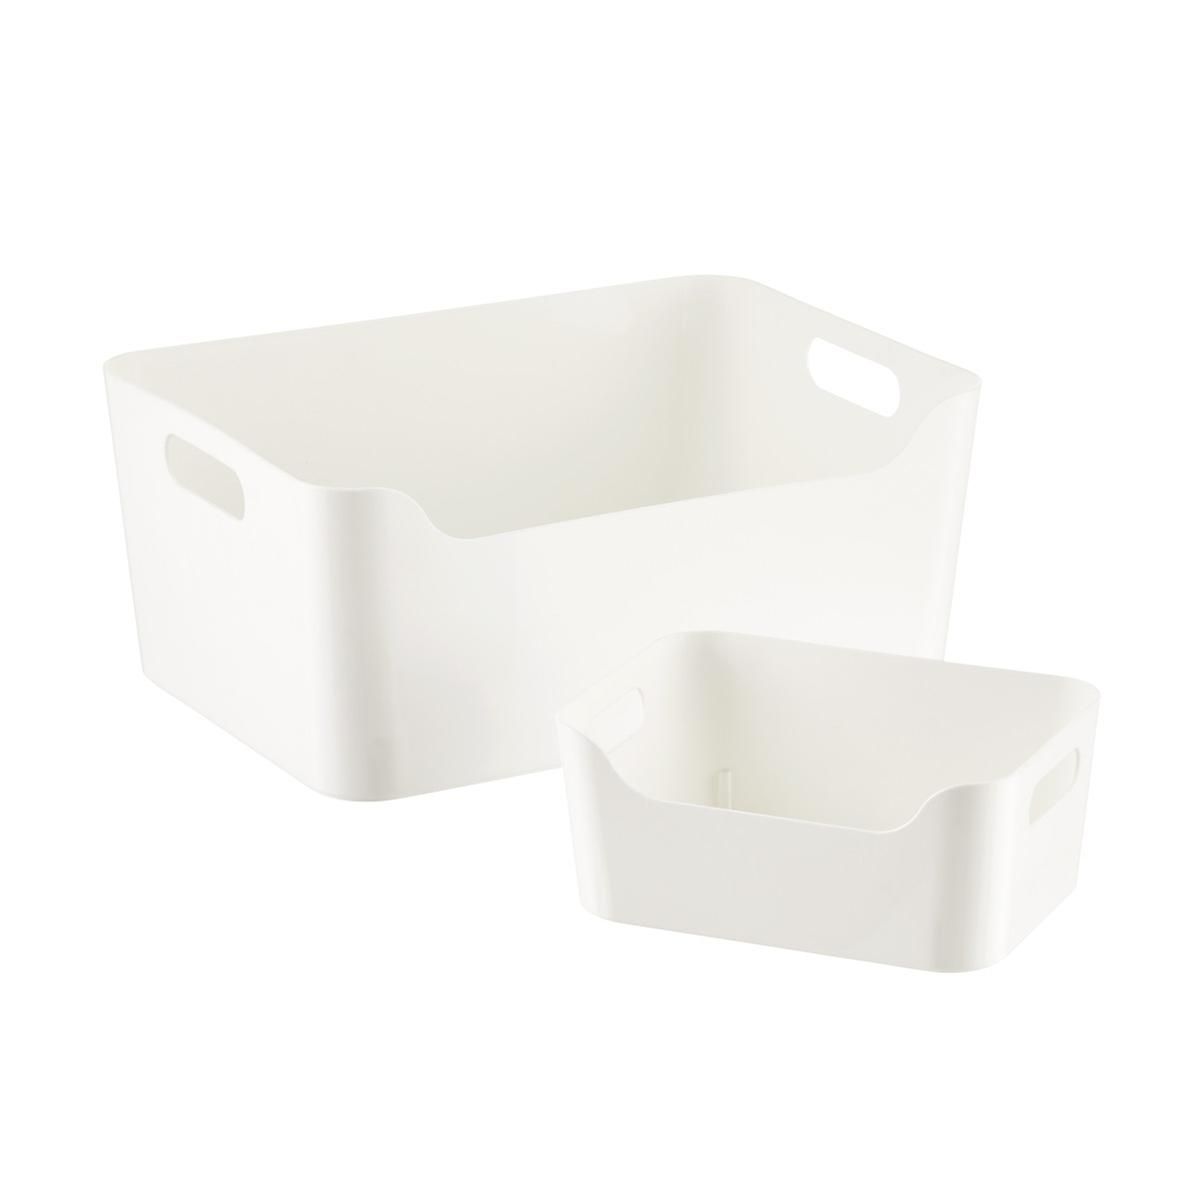 Large Plastic Storage Bin w/ Handles White | The Container Store